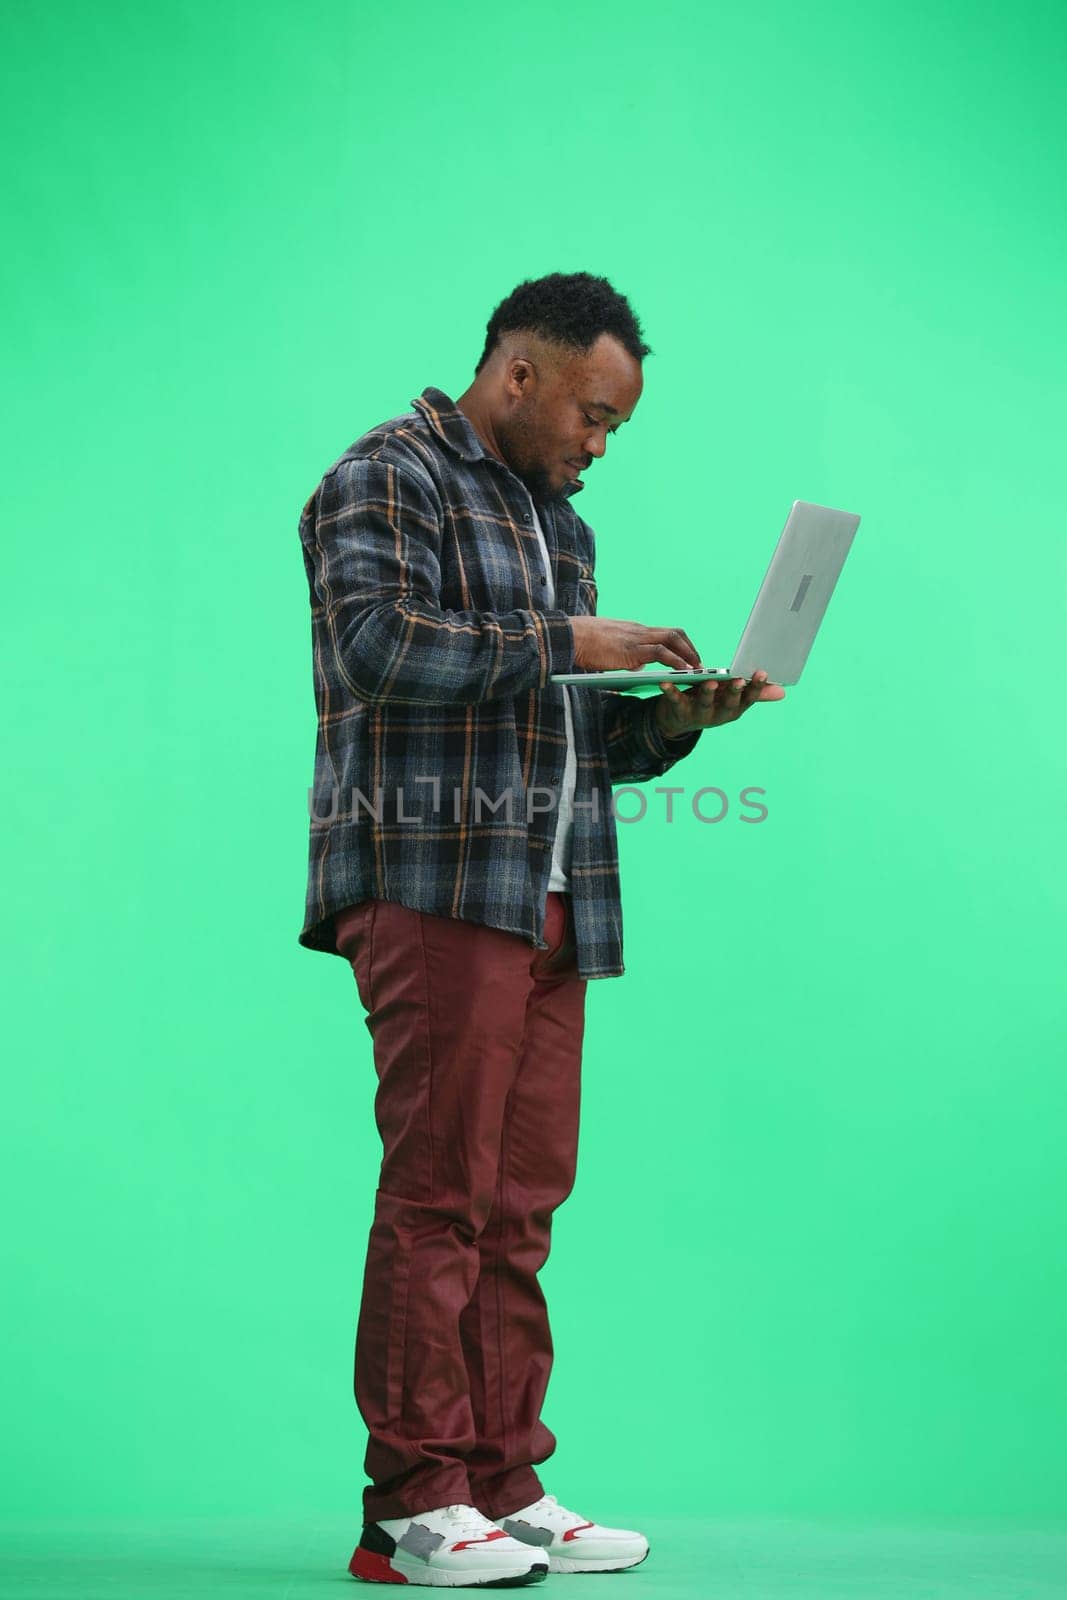 A man, full-length, on a green background, uses a laptop.